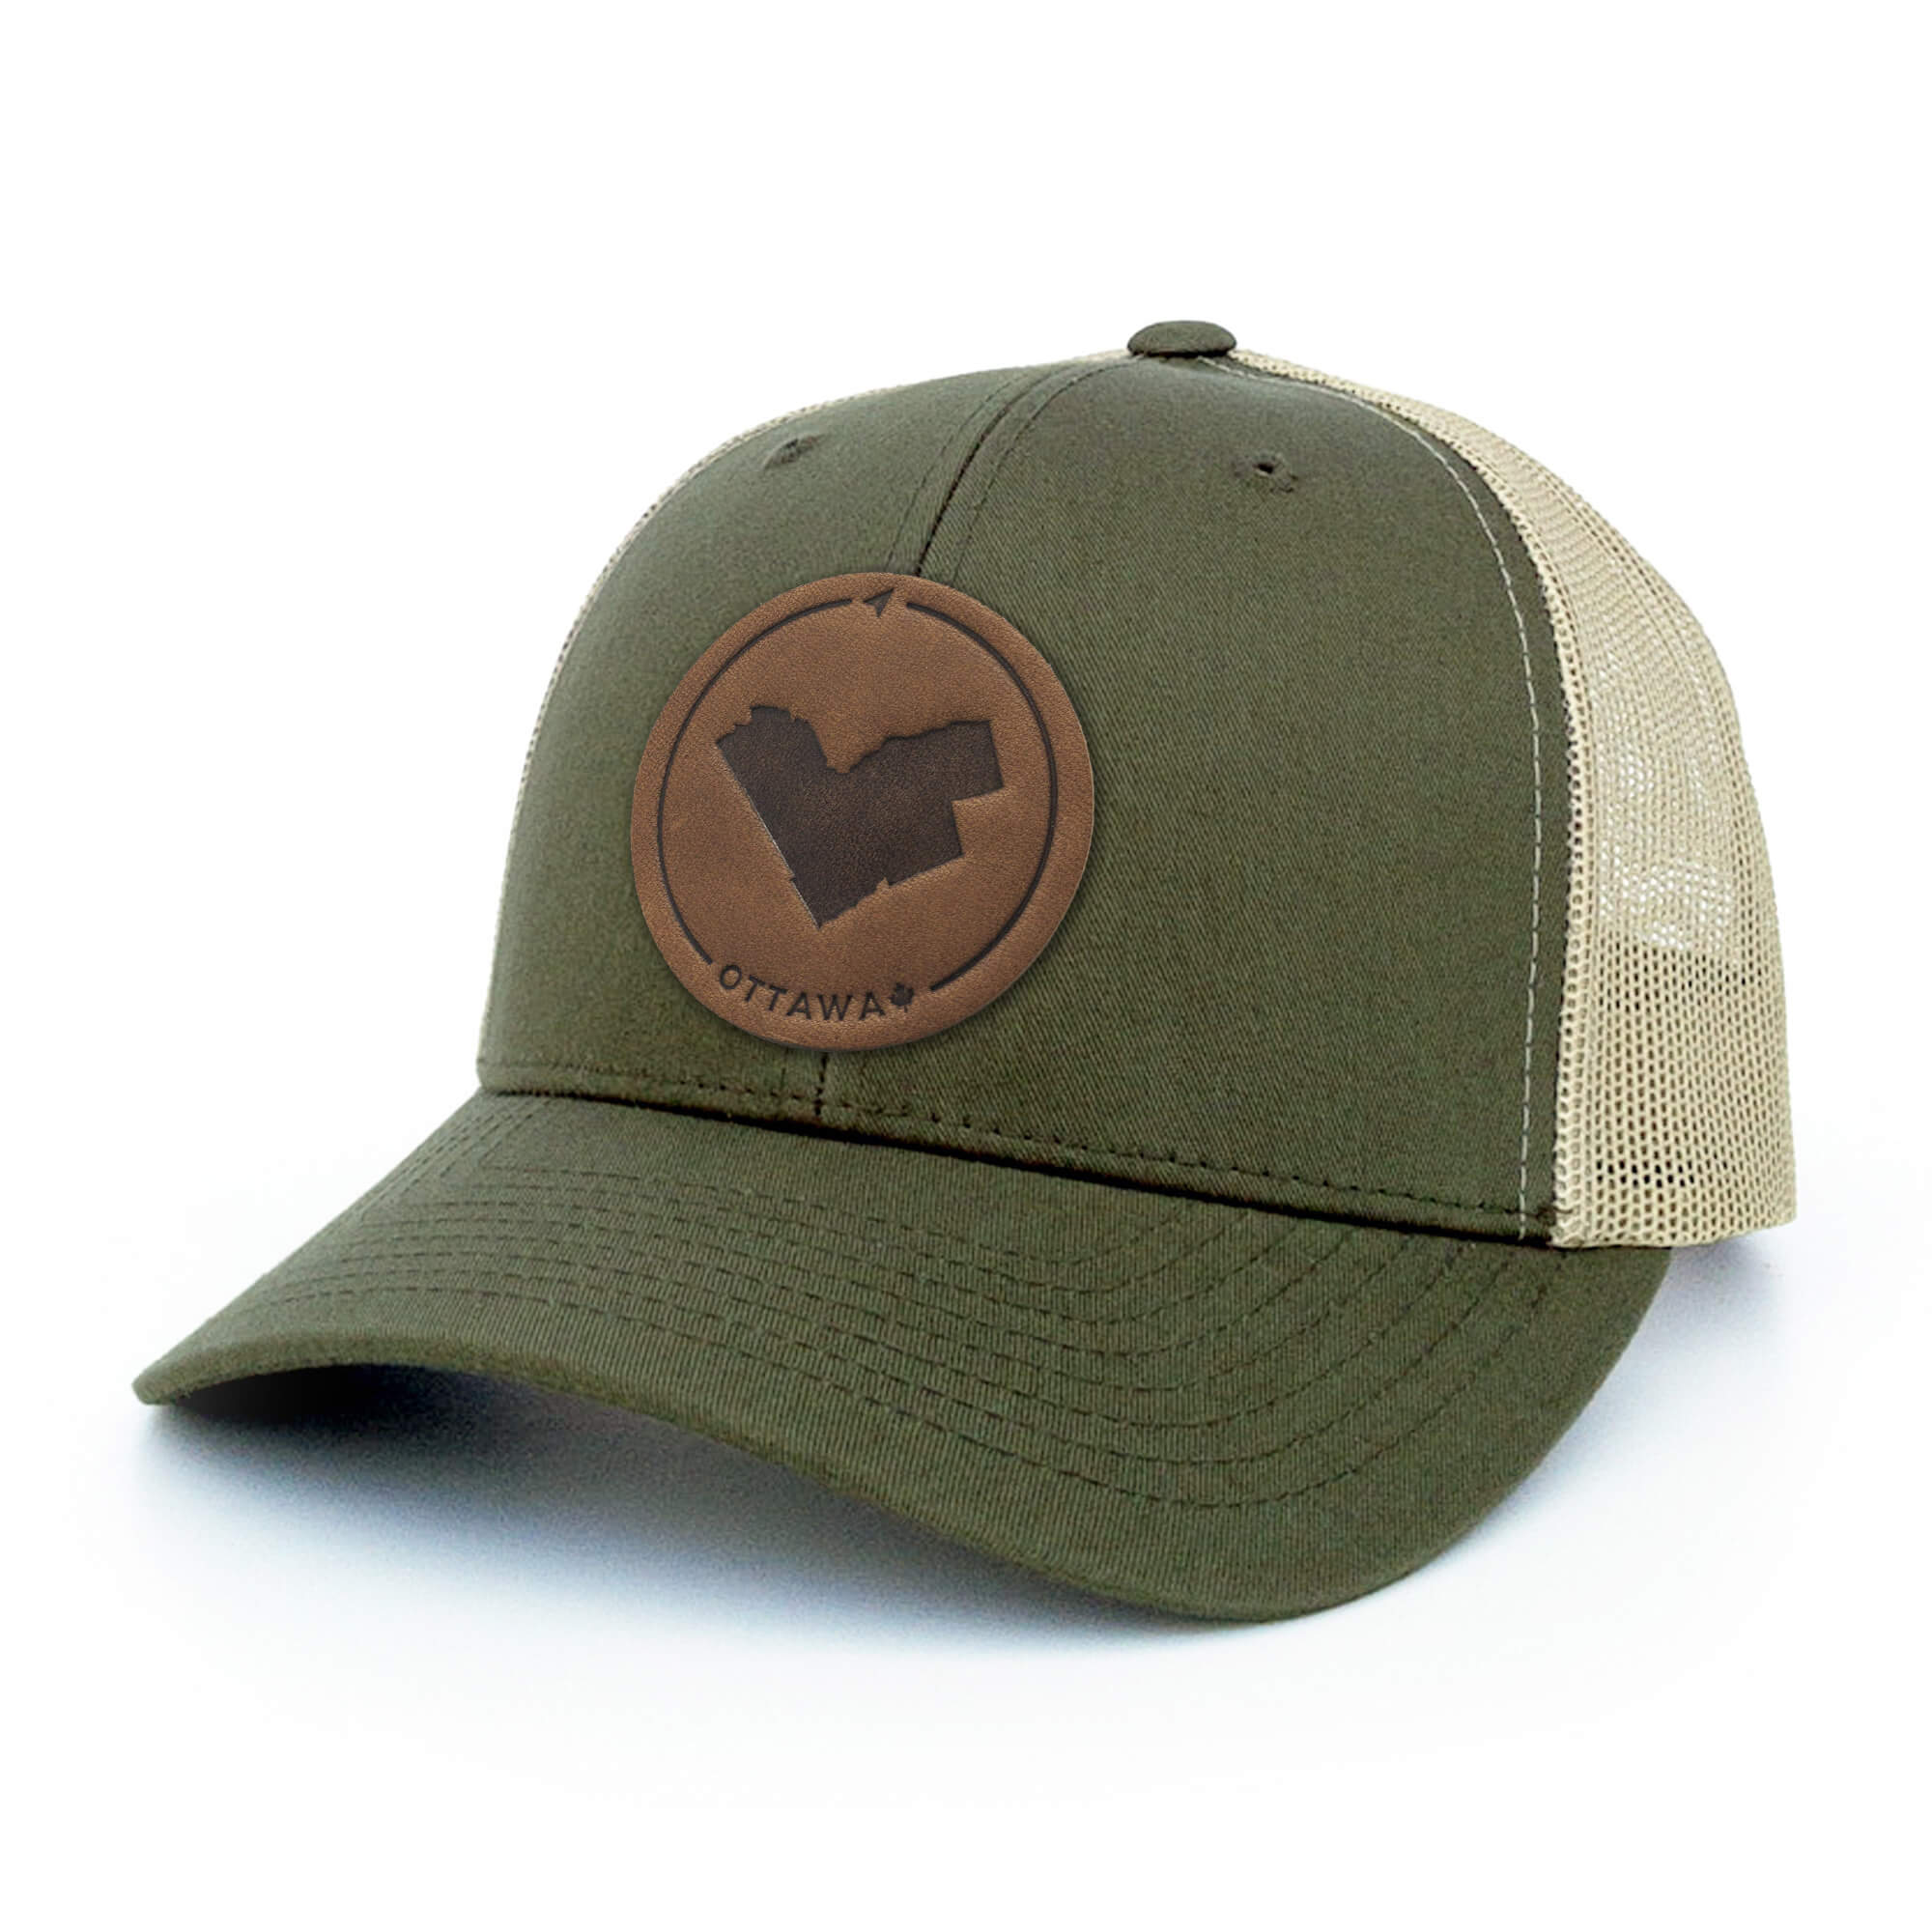 Moss Green and khaki trucker hat with full-grain leather patch of Ottawa | BLACK-002-007, CHARC-002-007, NAVY-002-007, HGREY-002-007, MOSS-002-007, BROWN-002-007